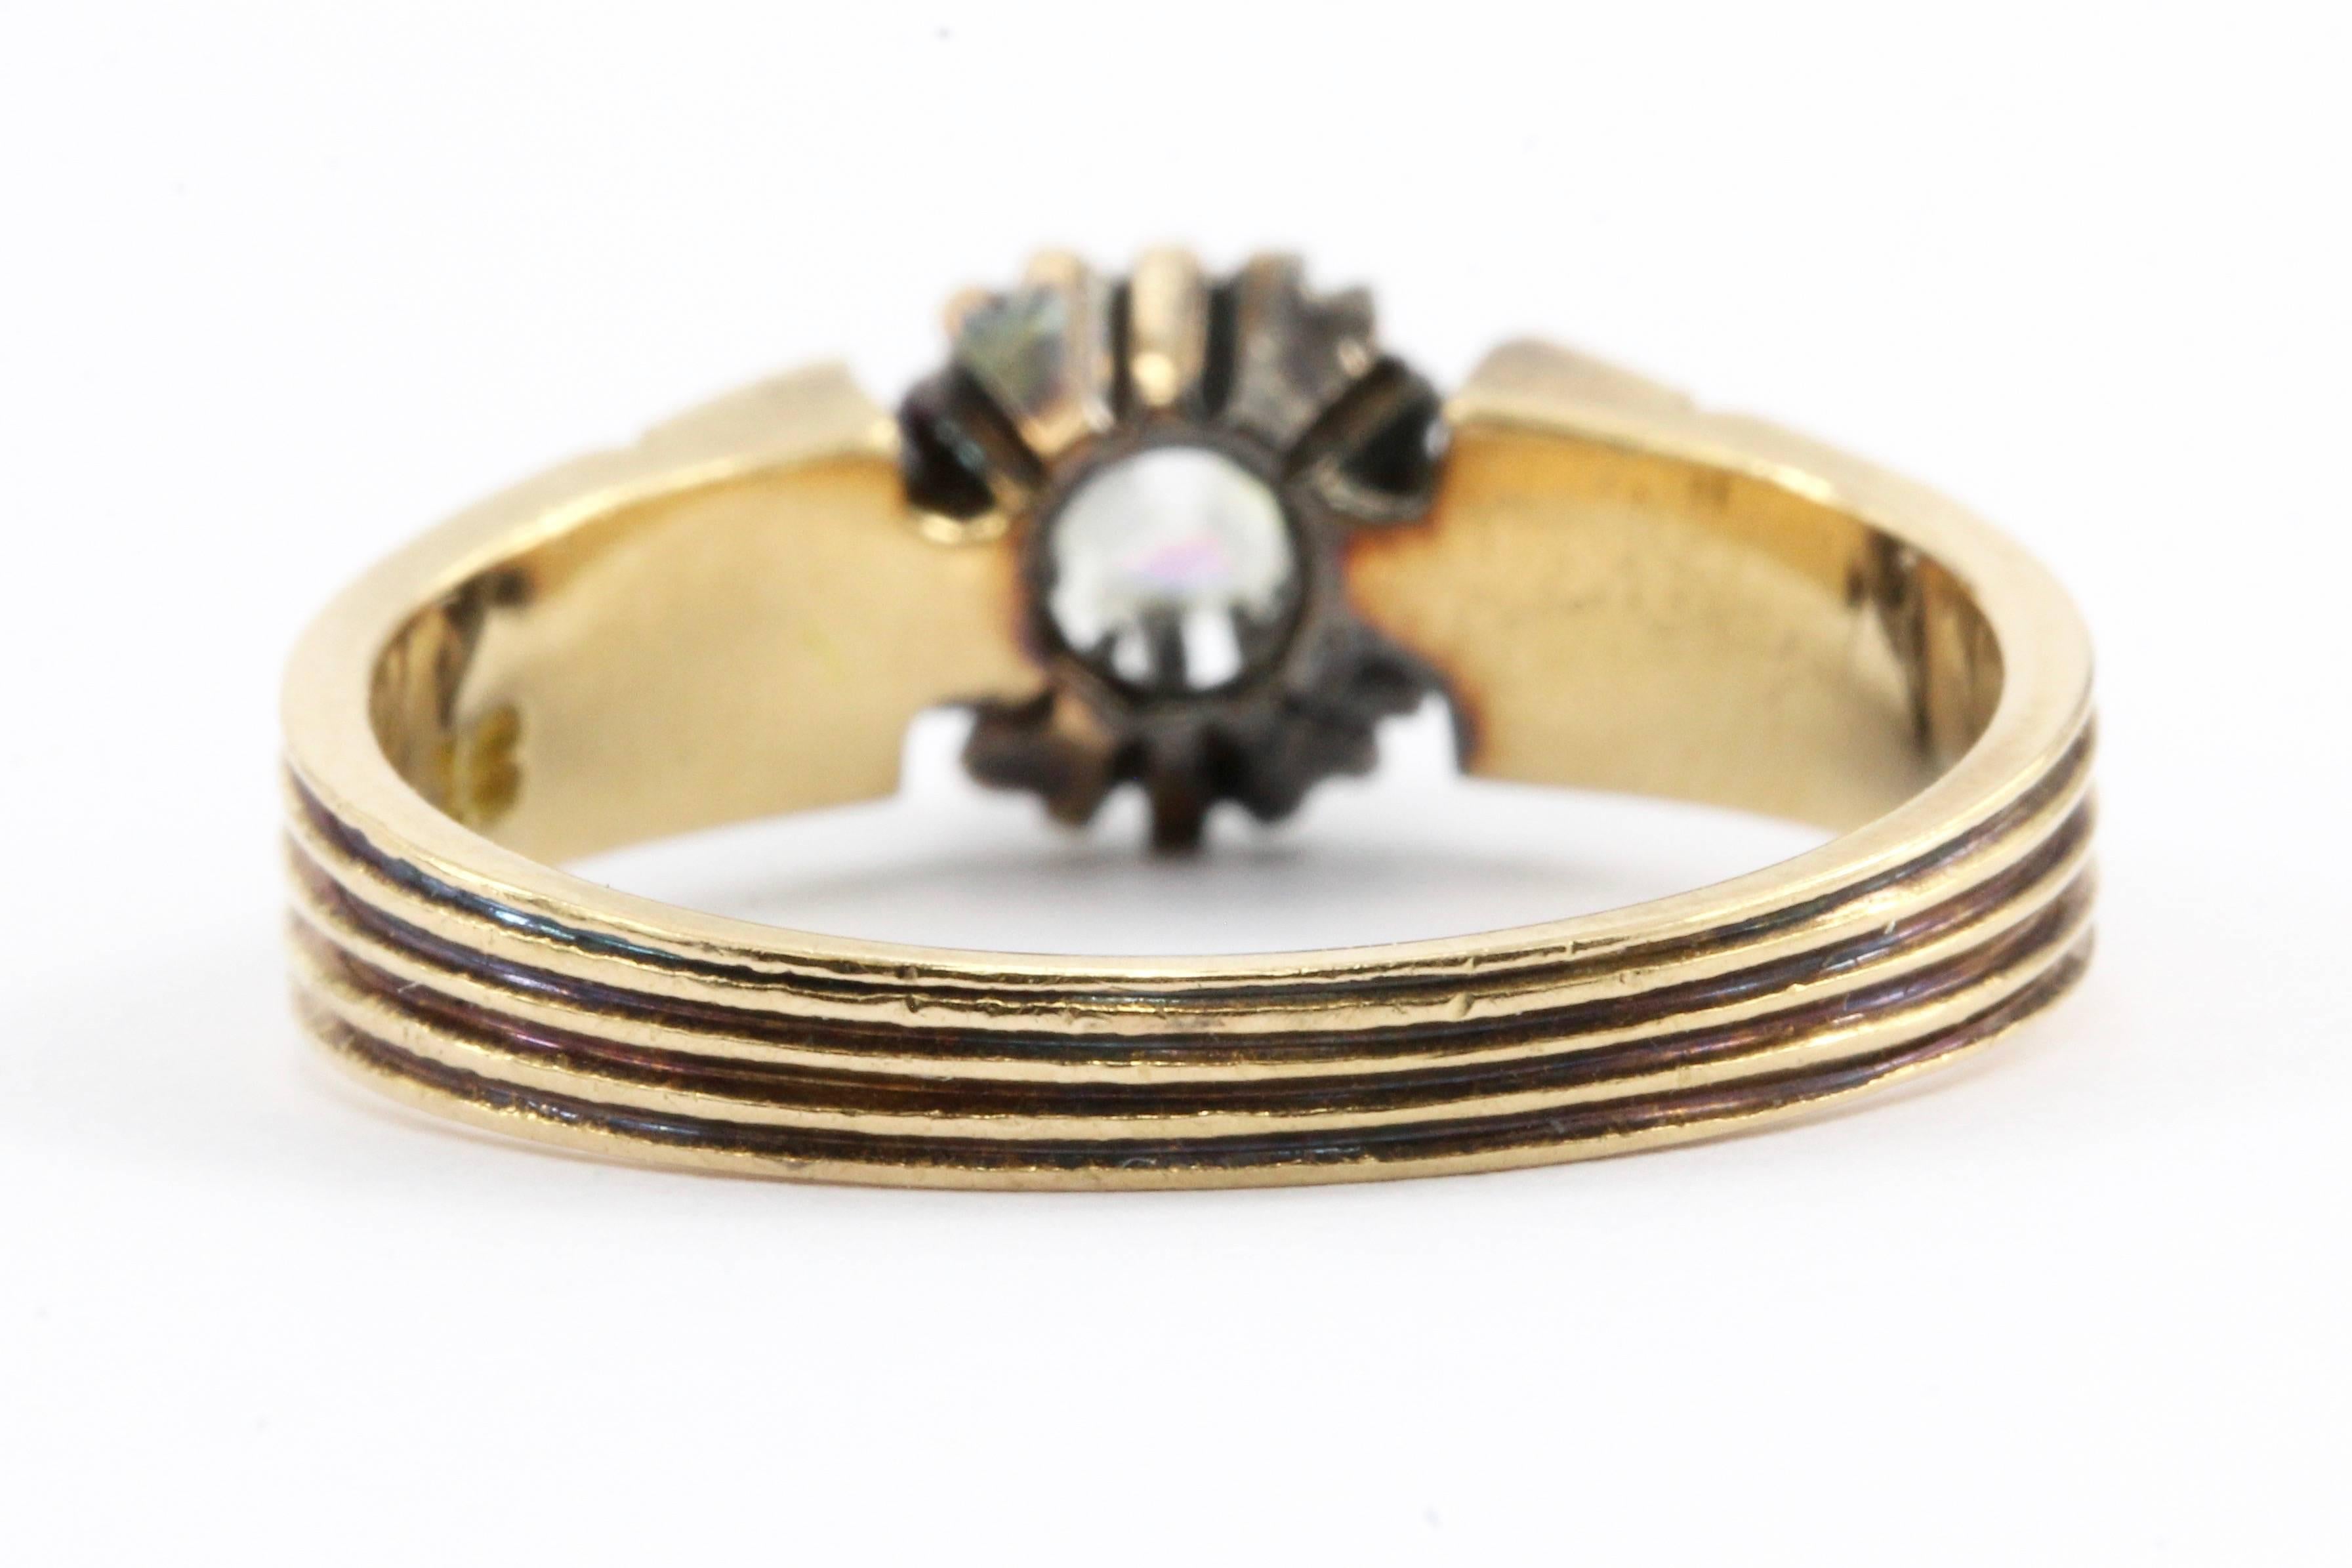 Late Victorian Victorian Gold .25 Carat Old Mine Engagement Ring, circa 1880s